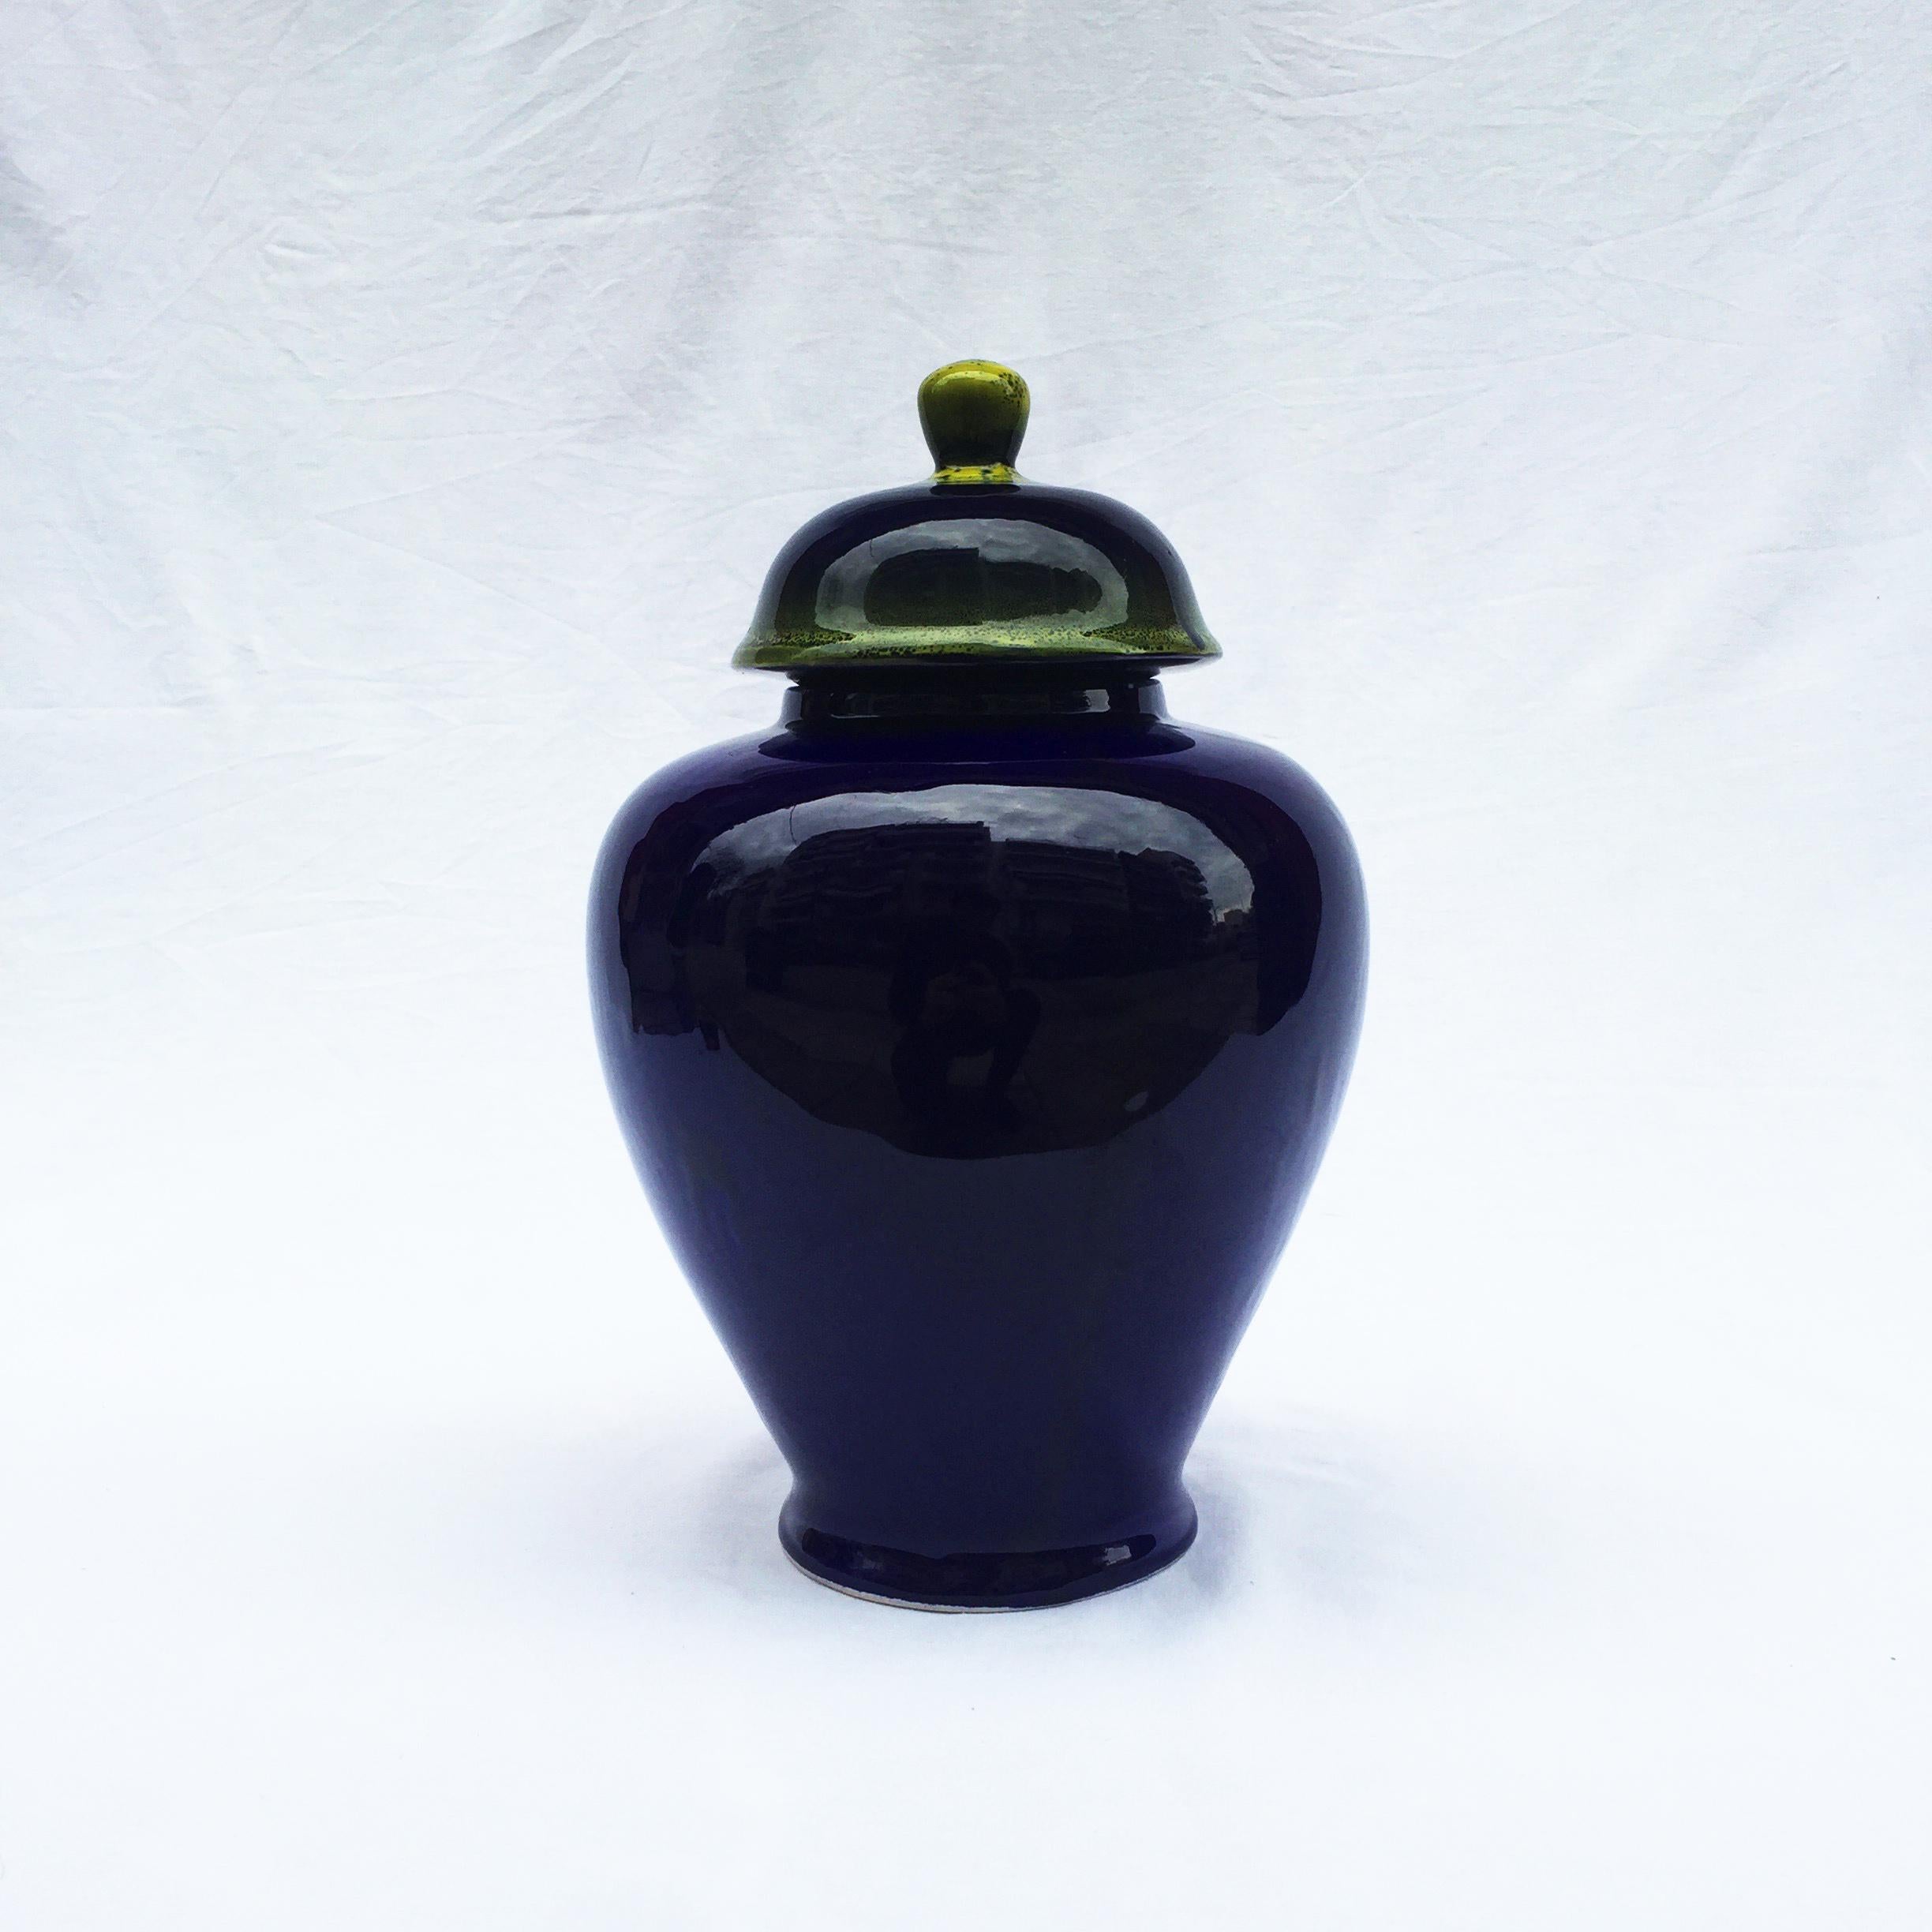 Handmade ceramic lidded vase in the form of a ginger jar. Navy blue glazed ceramic with shades of yellow on the lid. Imported and made in Greece during the 1980s. Listing is only for one more available on different designs.
  